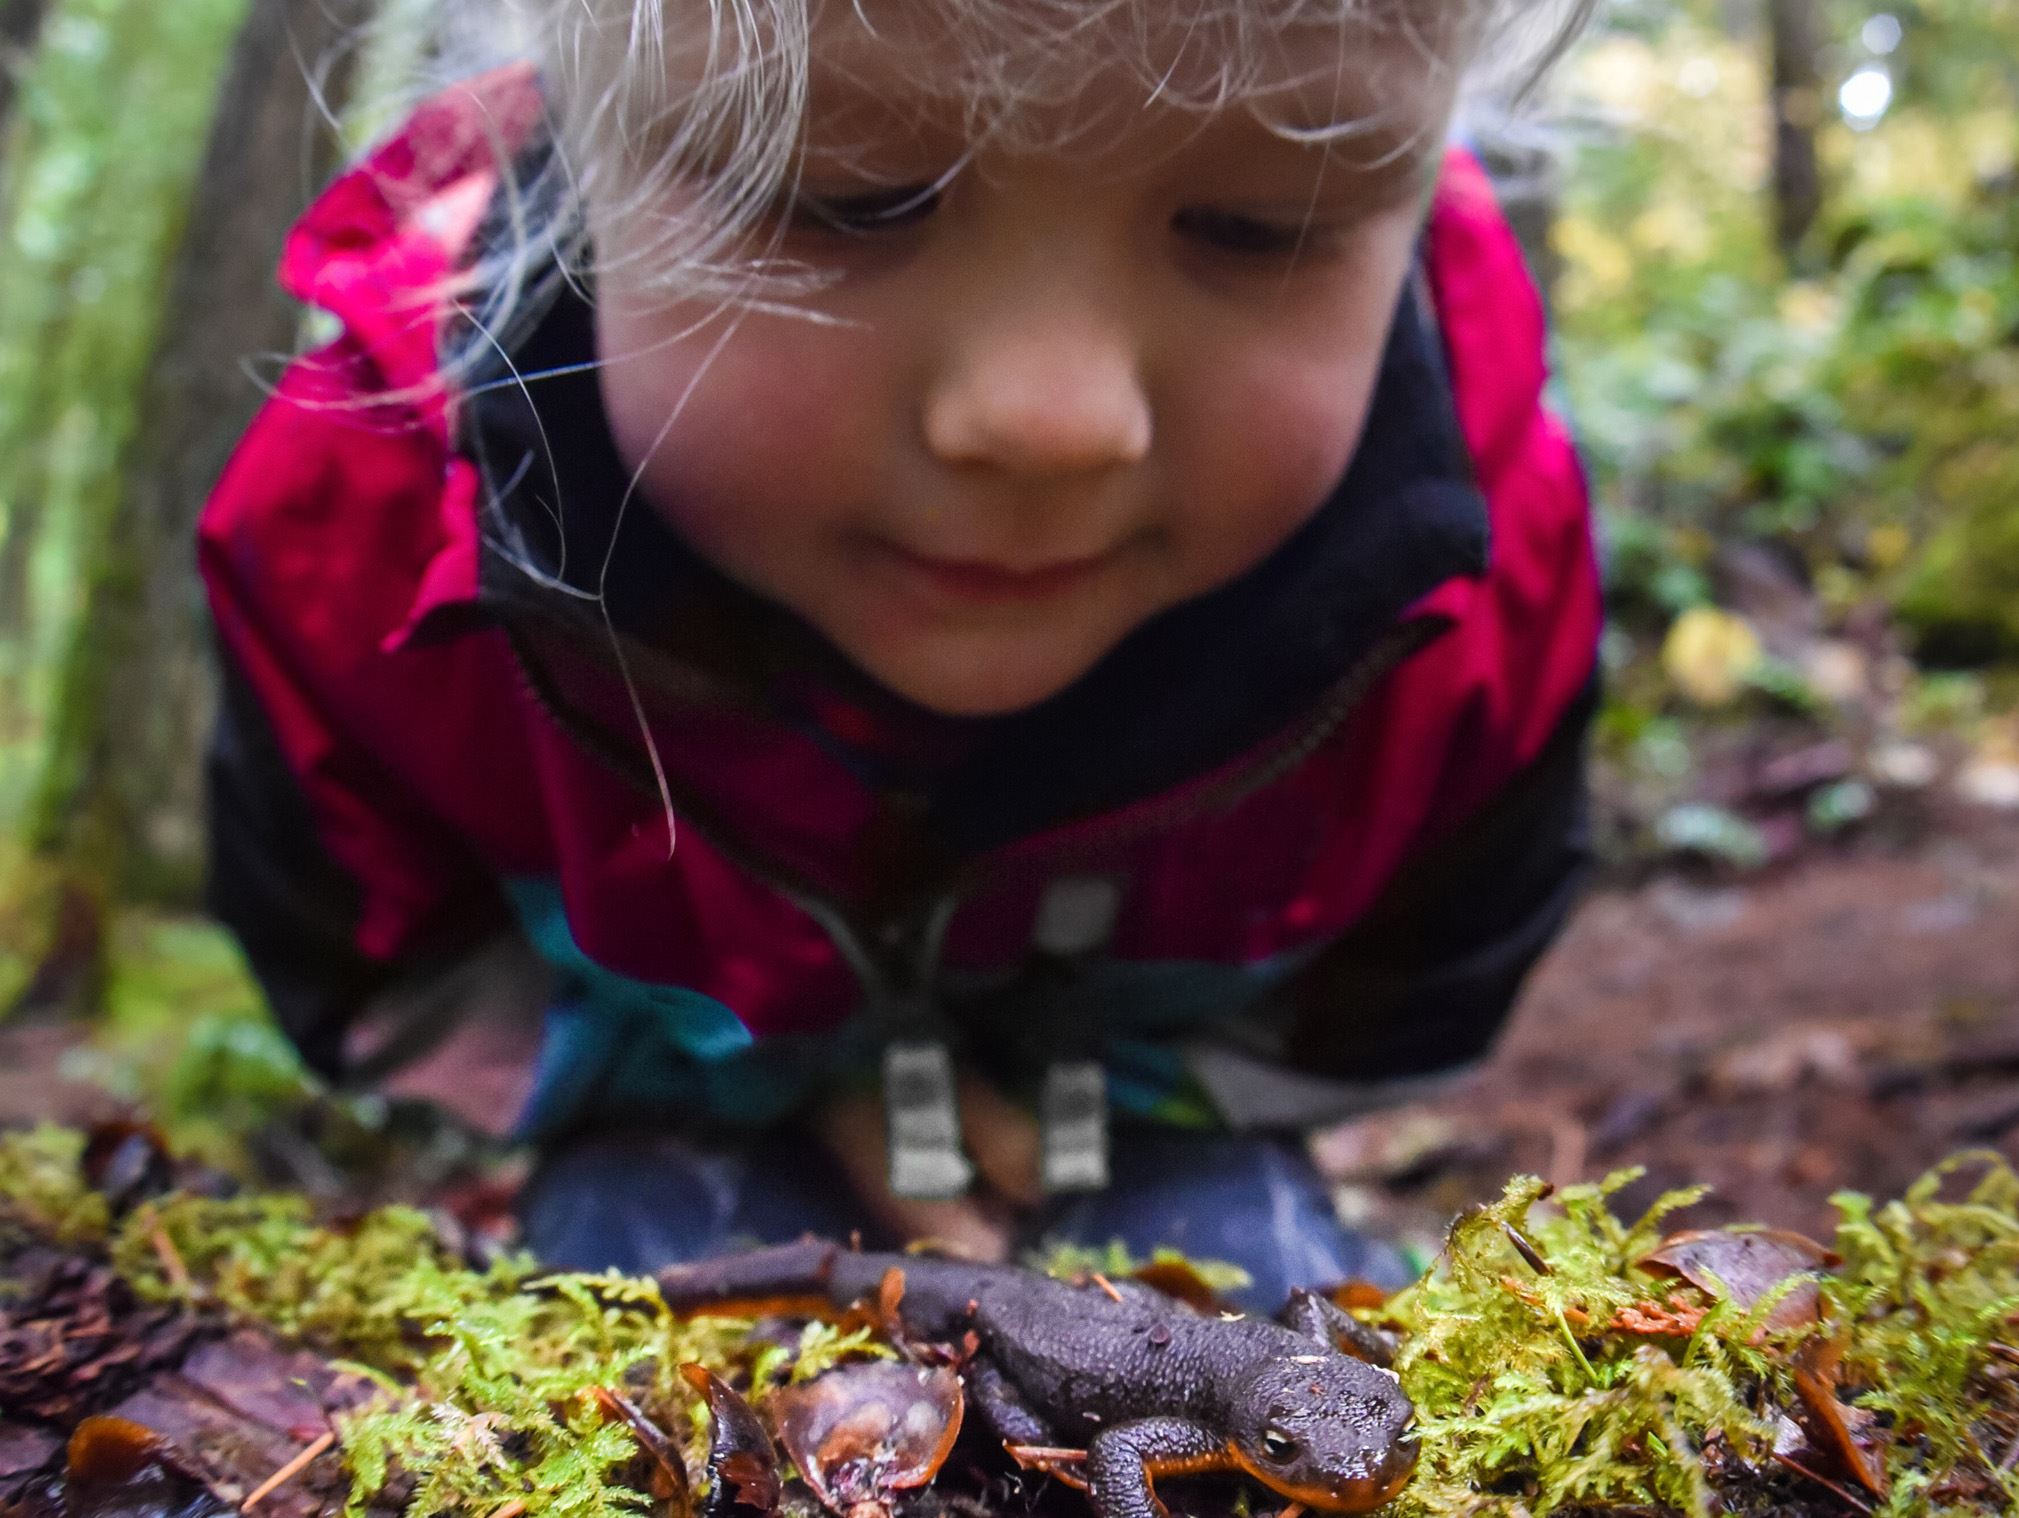 A small child bends forward to look closely at a salamander on a mossy log.